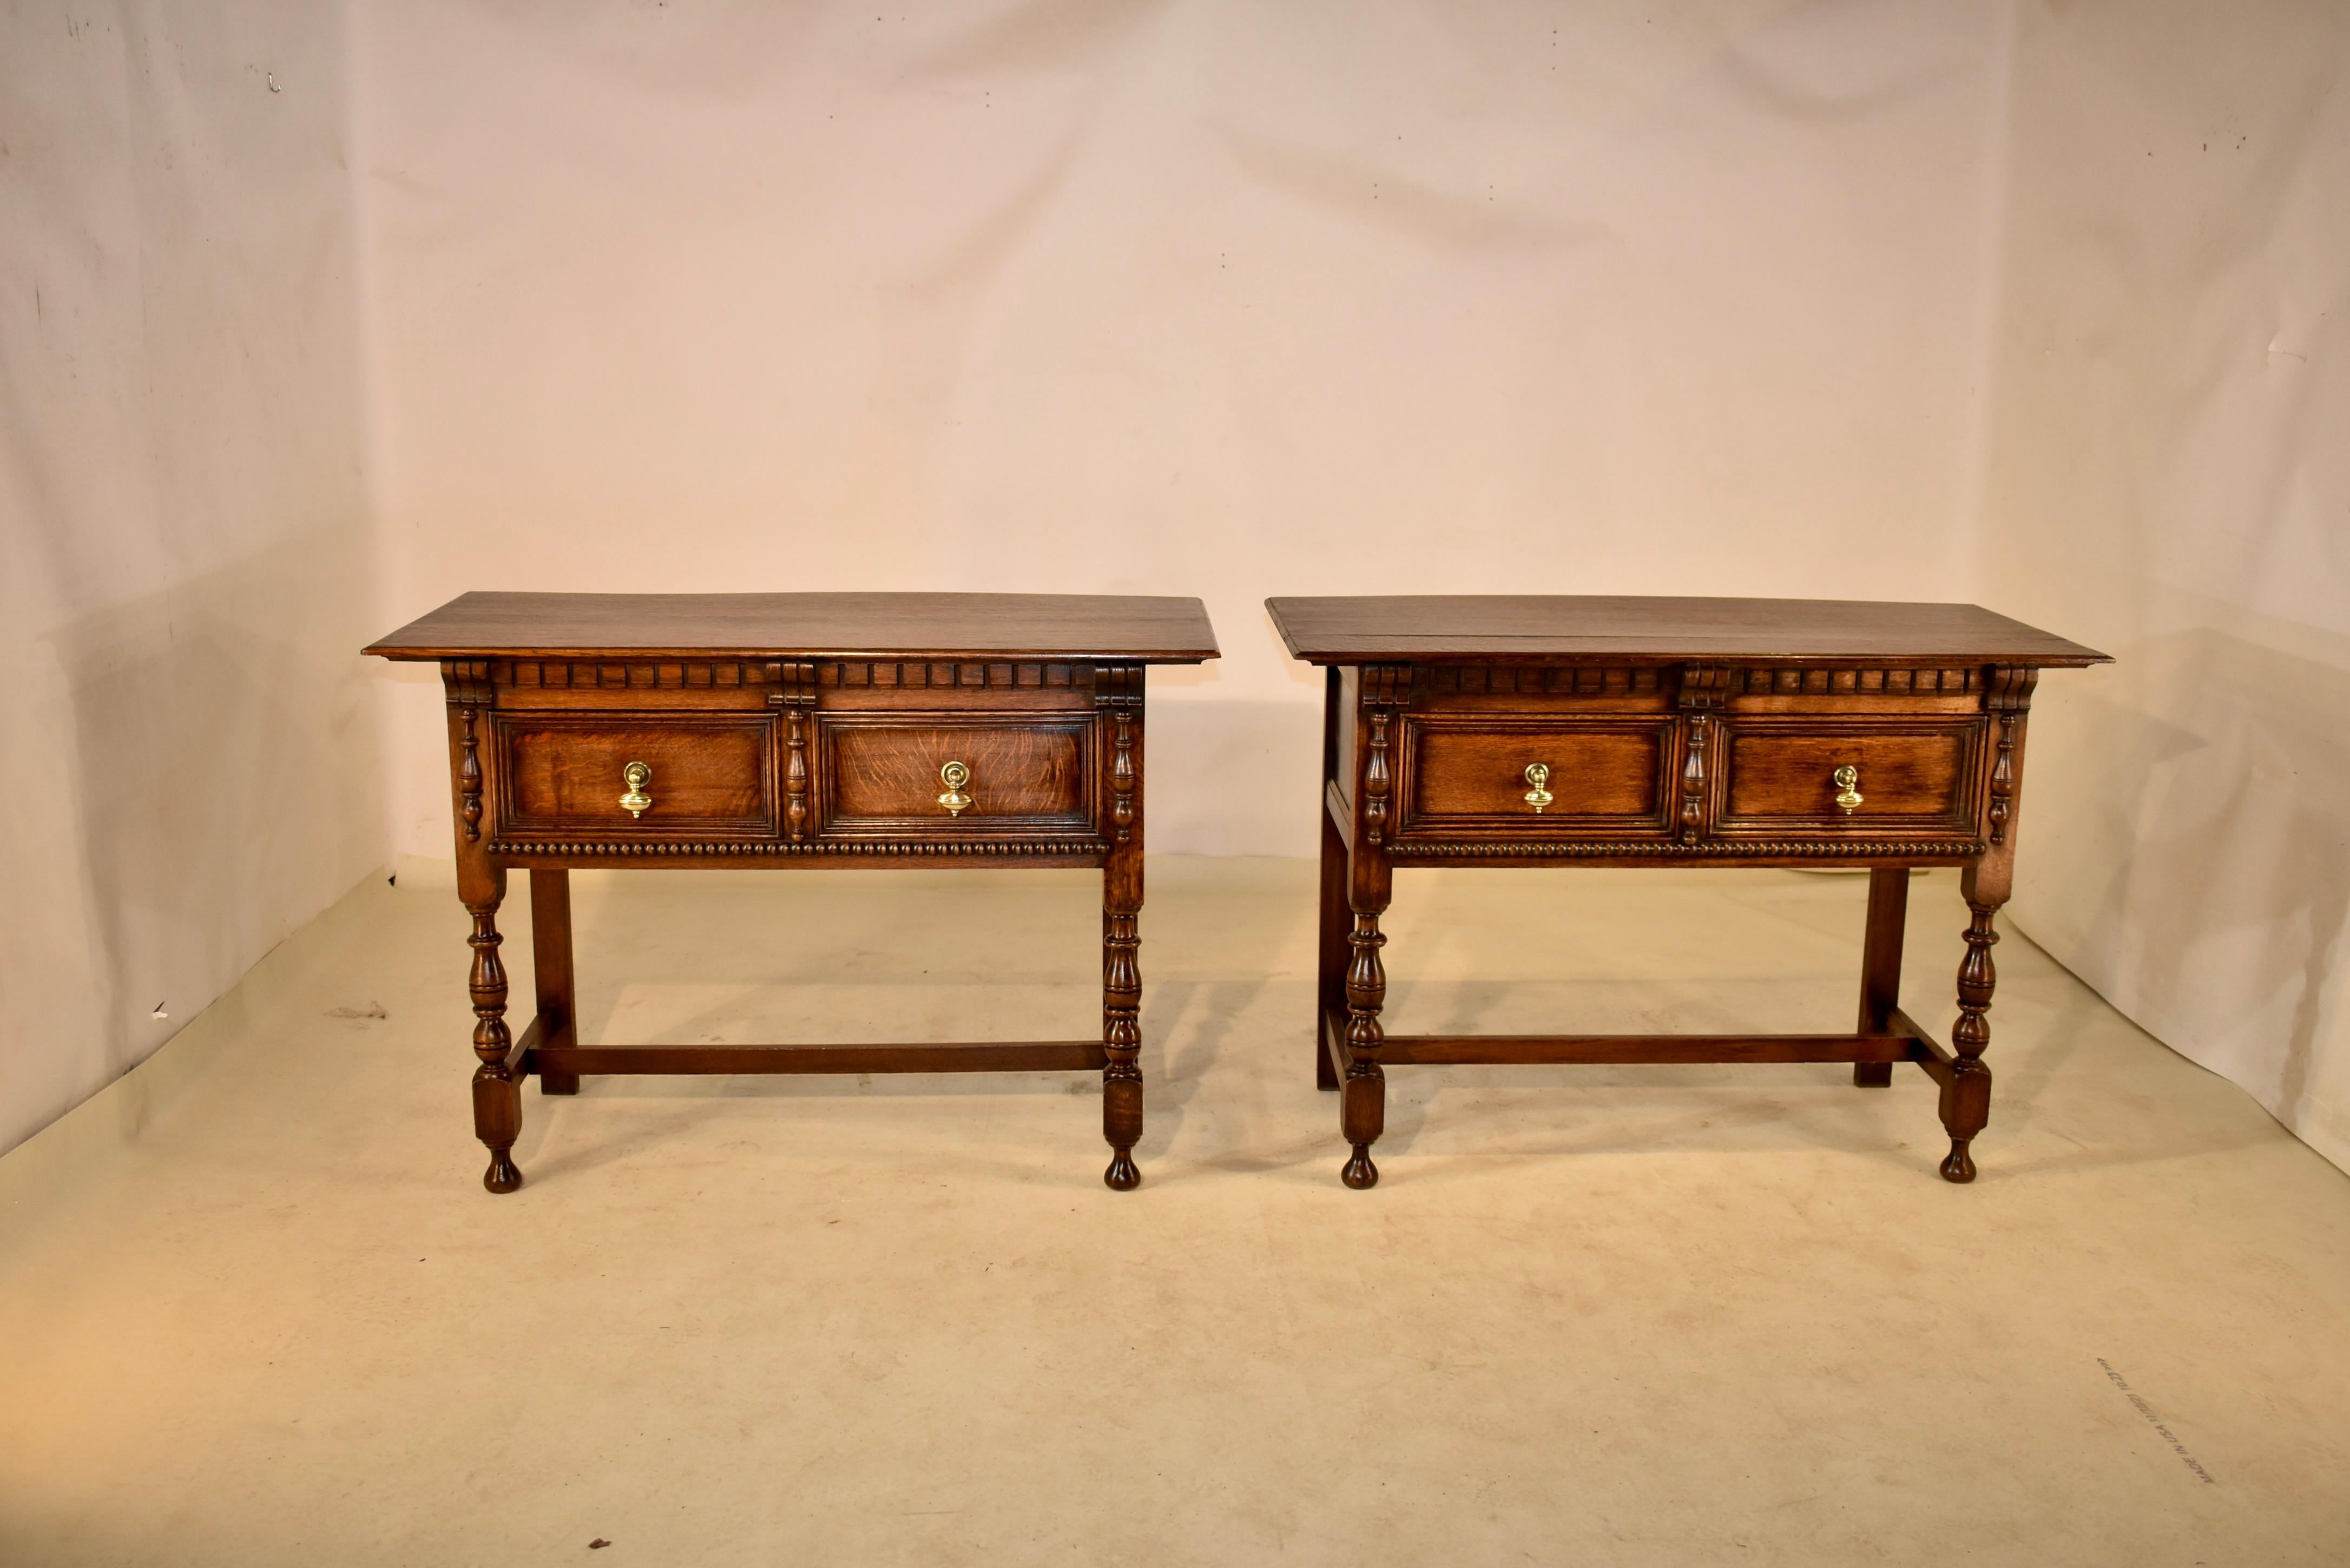 Rare pair of 19th century oak sideboards from England. The tops are nicely figured and follow down to simple paneled sides and two paneled drawers in the front. The sideboards have lovely dentil molding over the drawers and they are flanked by